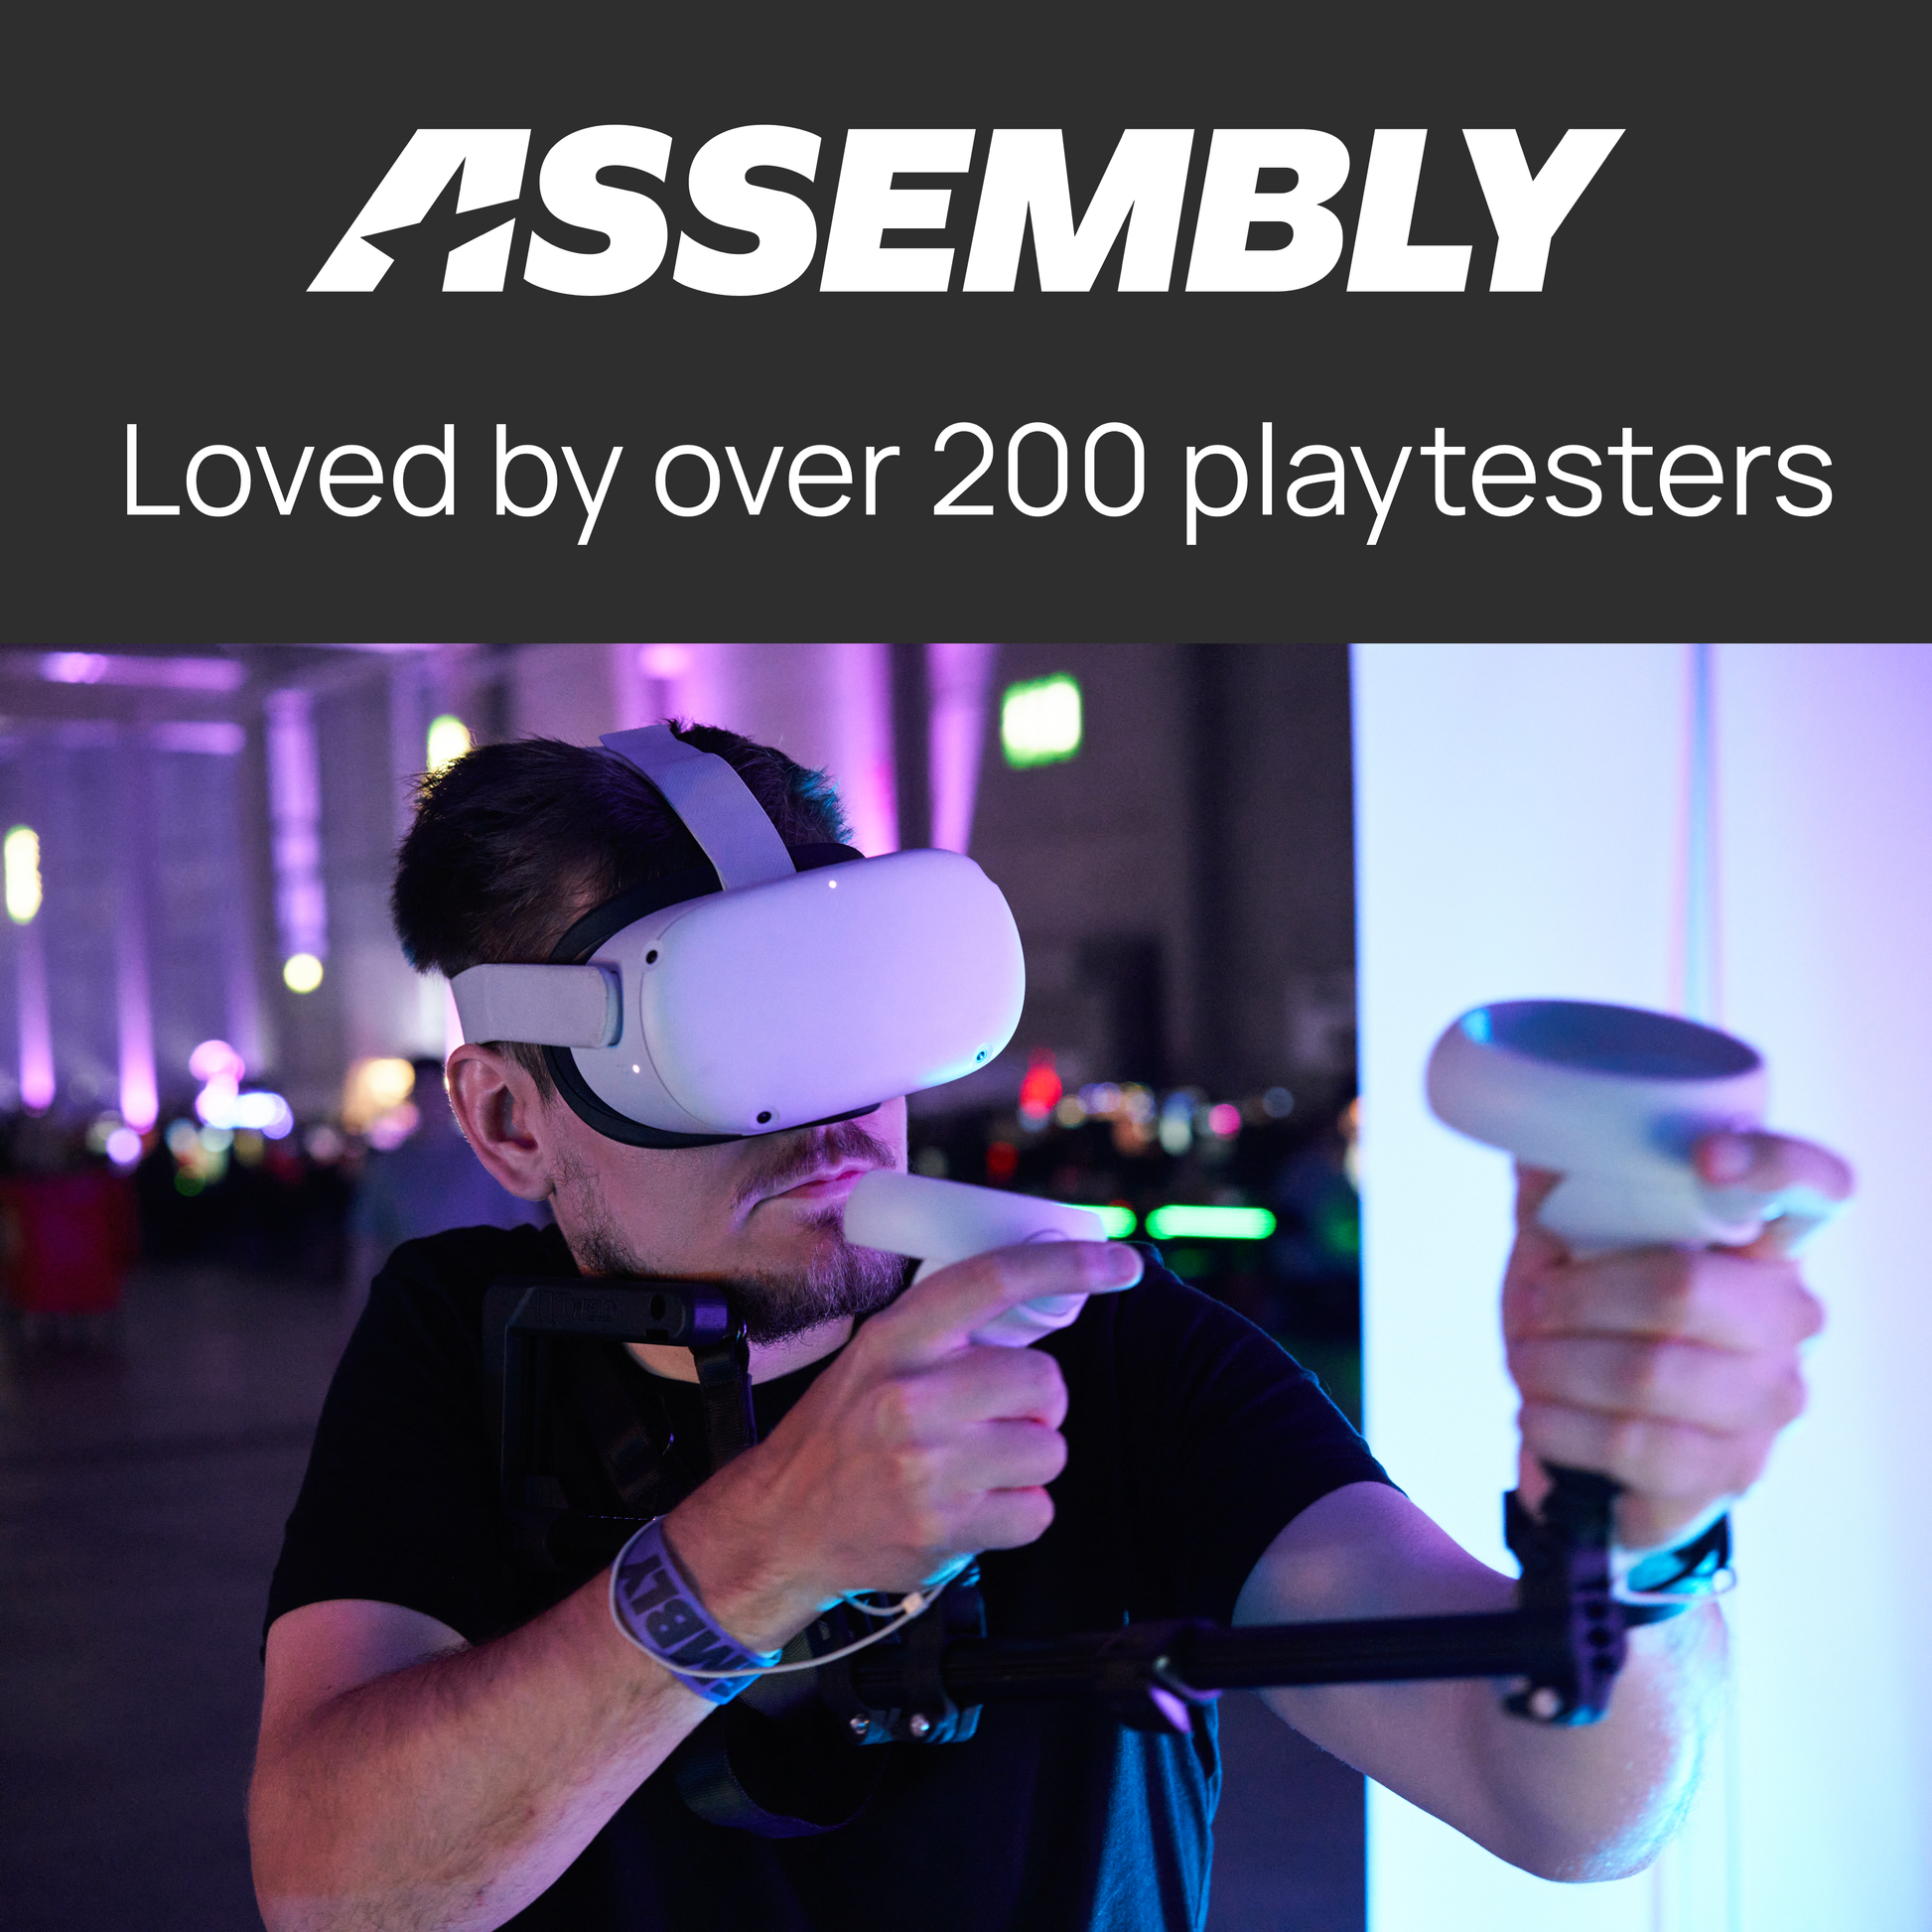 Wield VR OneStock loved by playtesters at Assembly gaming expo